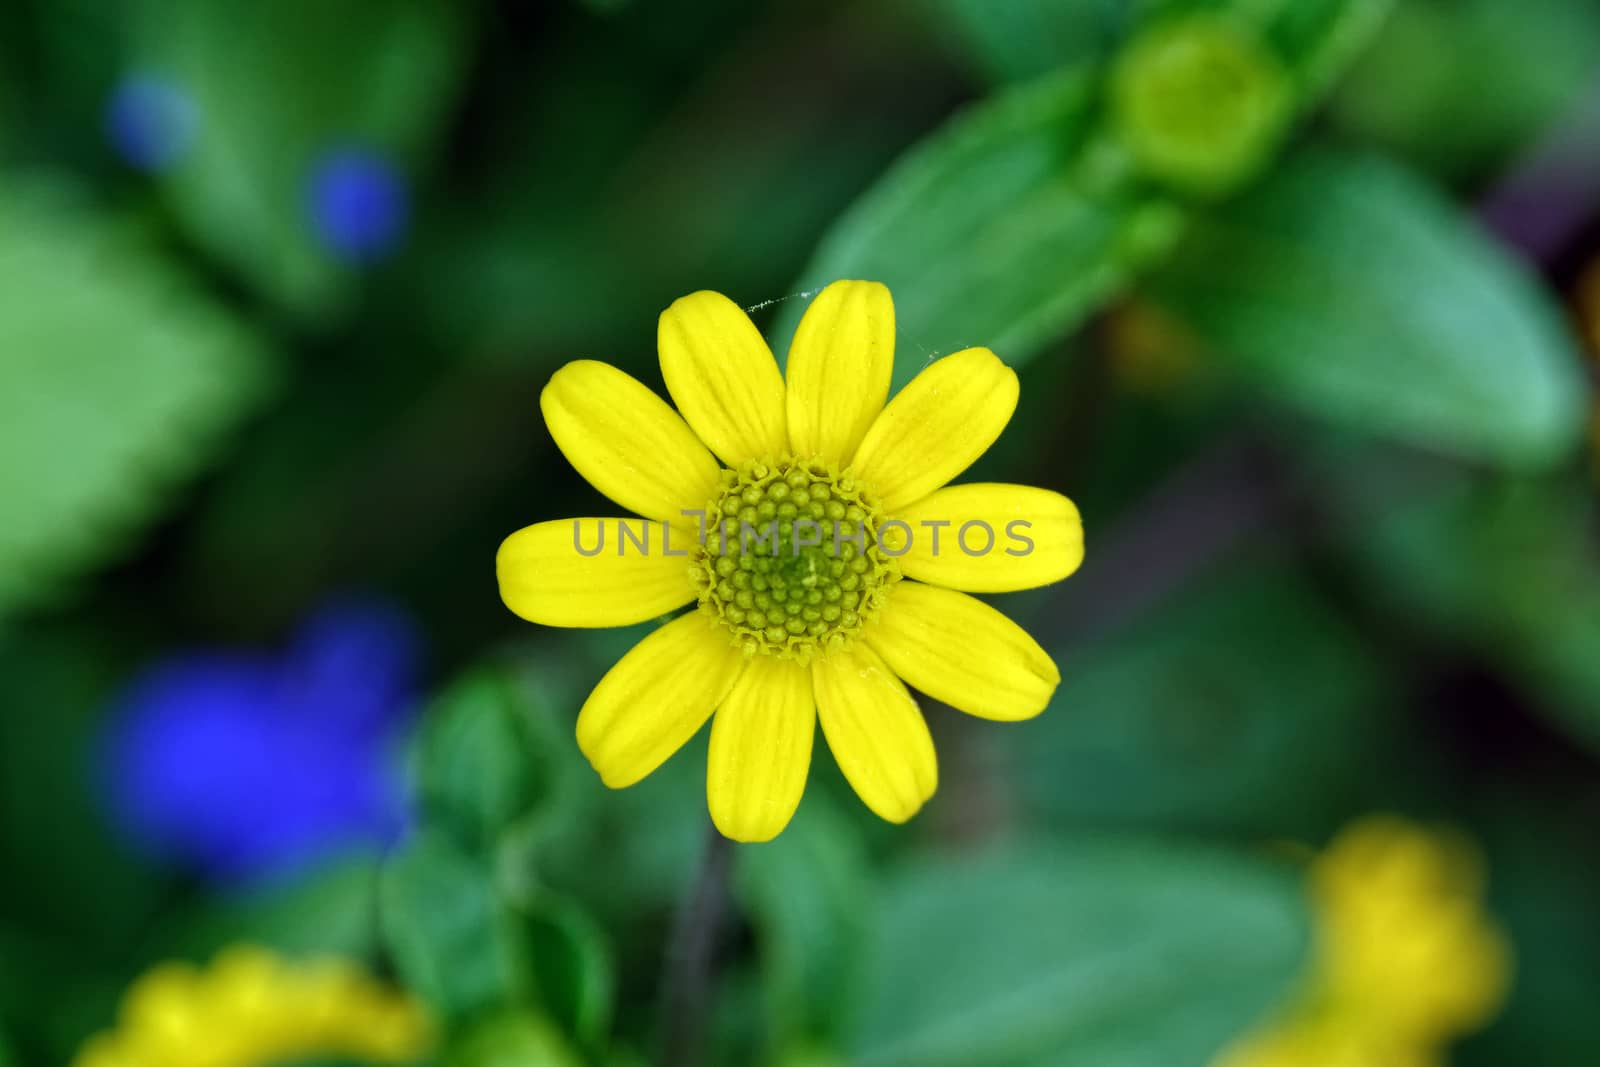 Nice yellow blossom with blurred green background.